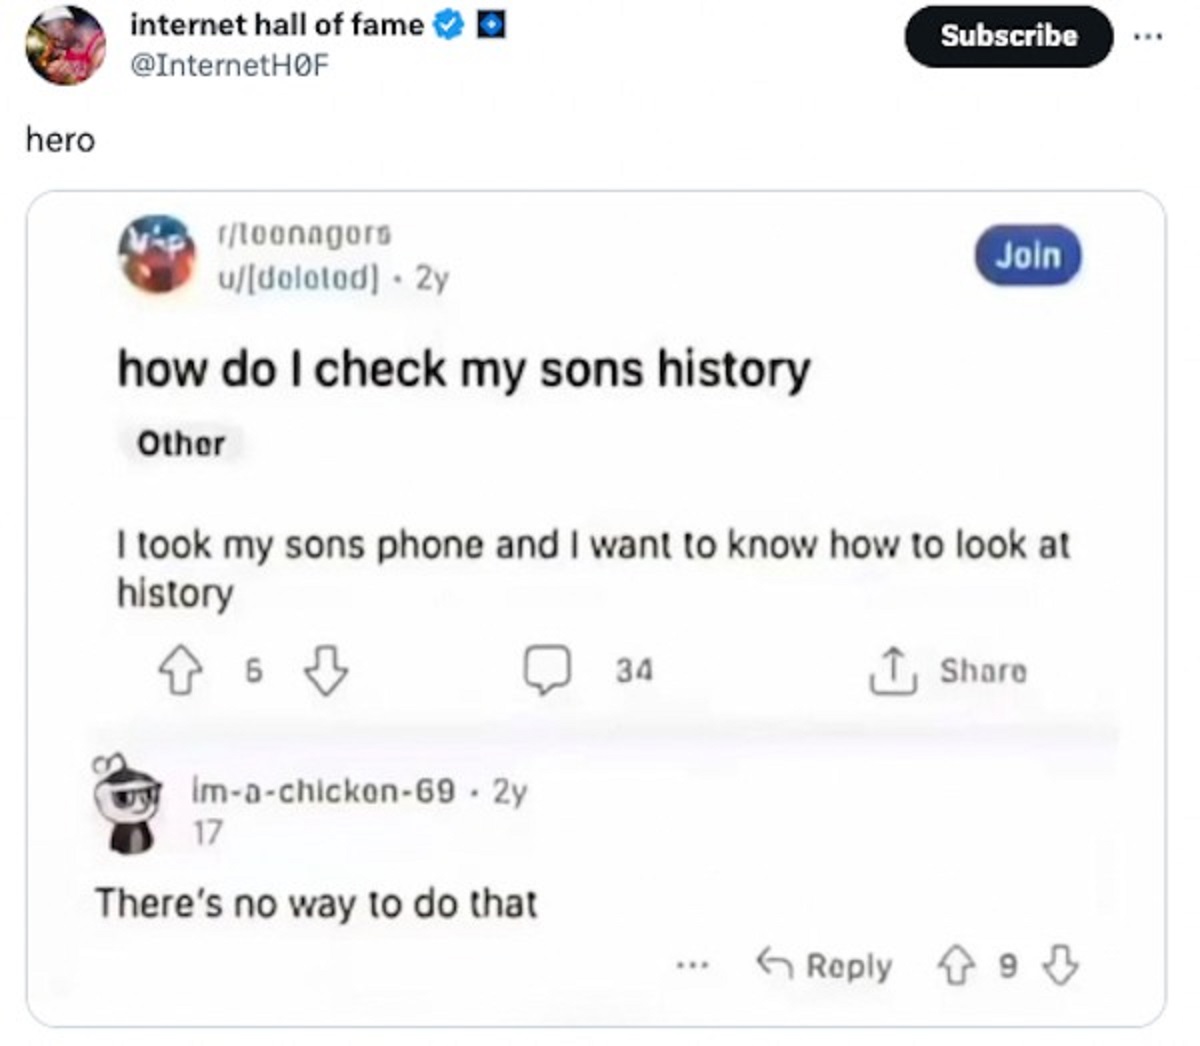 web page - hero internet hall of fame F rtoonagors udeleted 2y how do I check my sons history Other imachicken69 2y I took my sons phone and I want to know how to look at history 17 There's no way to do that 34 Subscribe Join 9